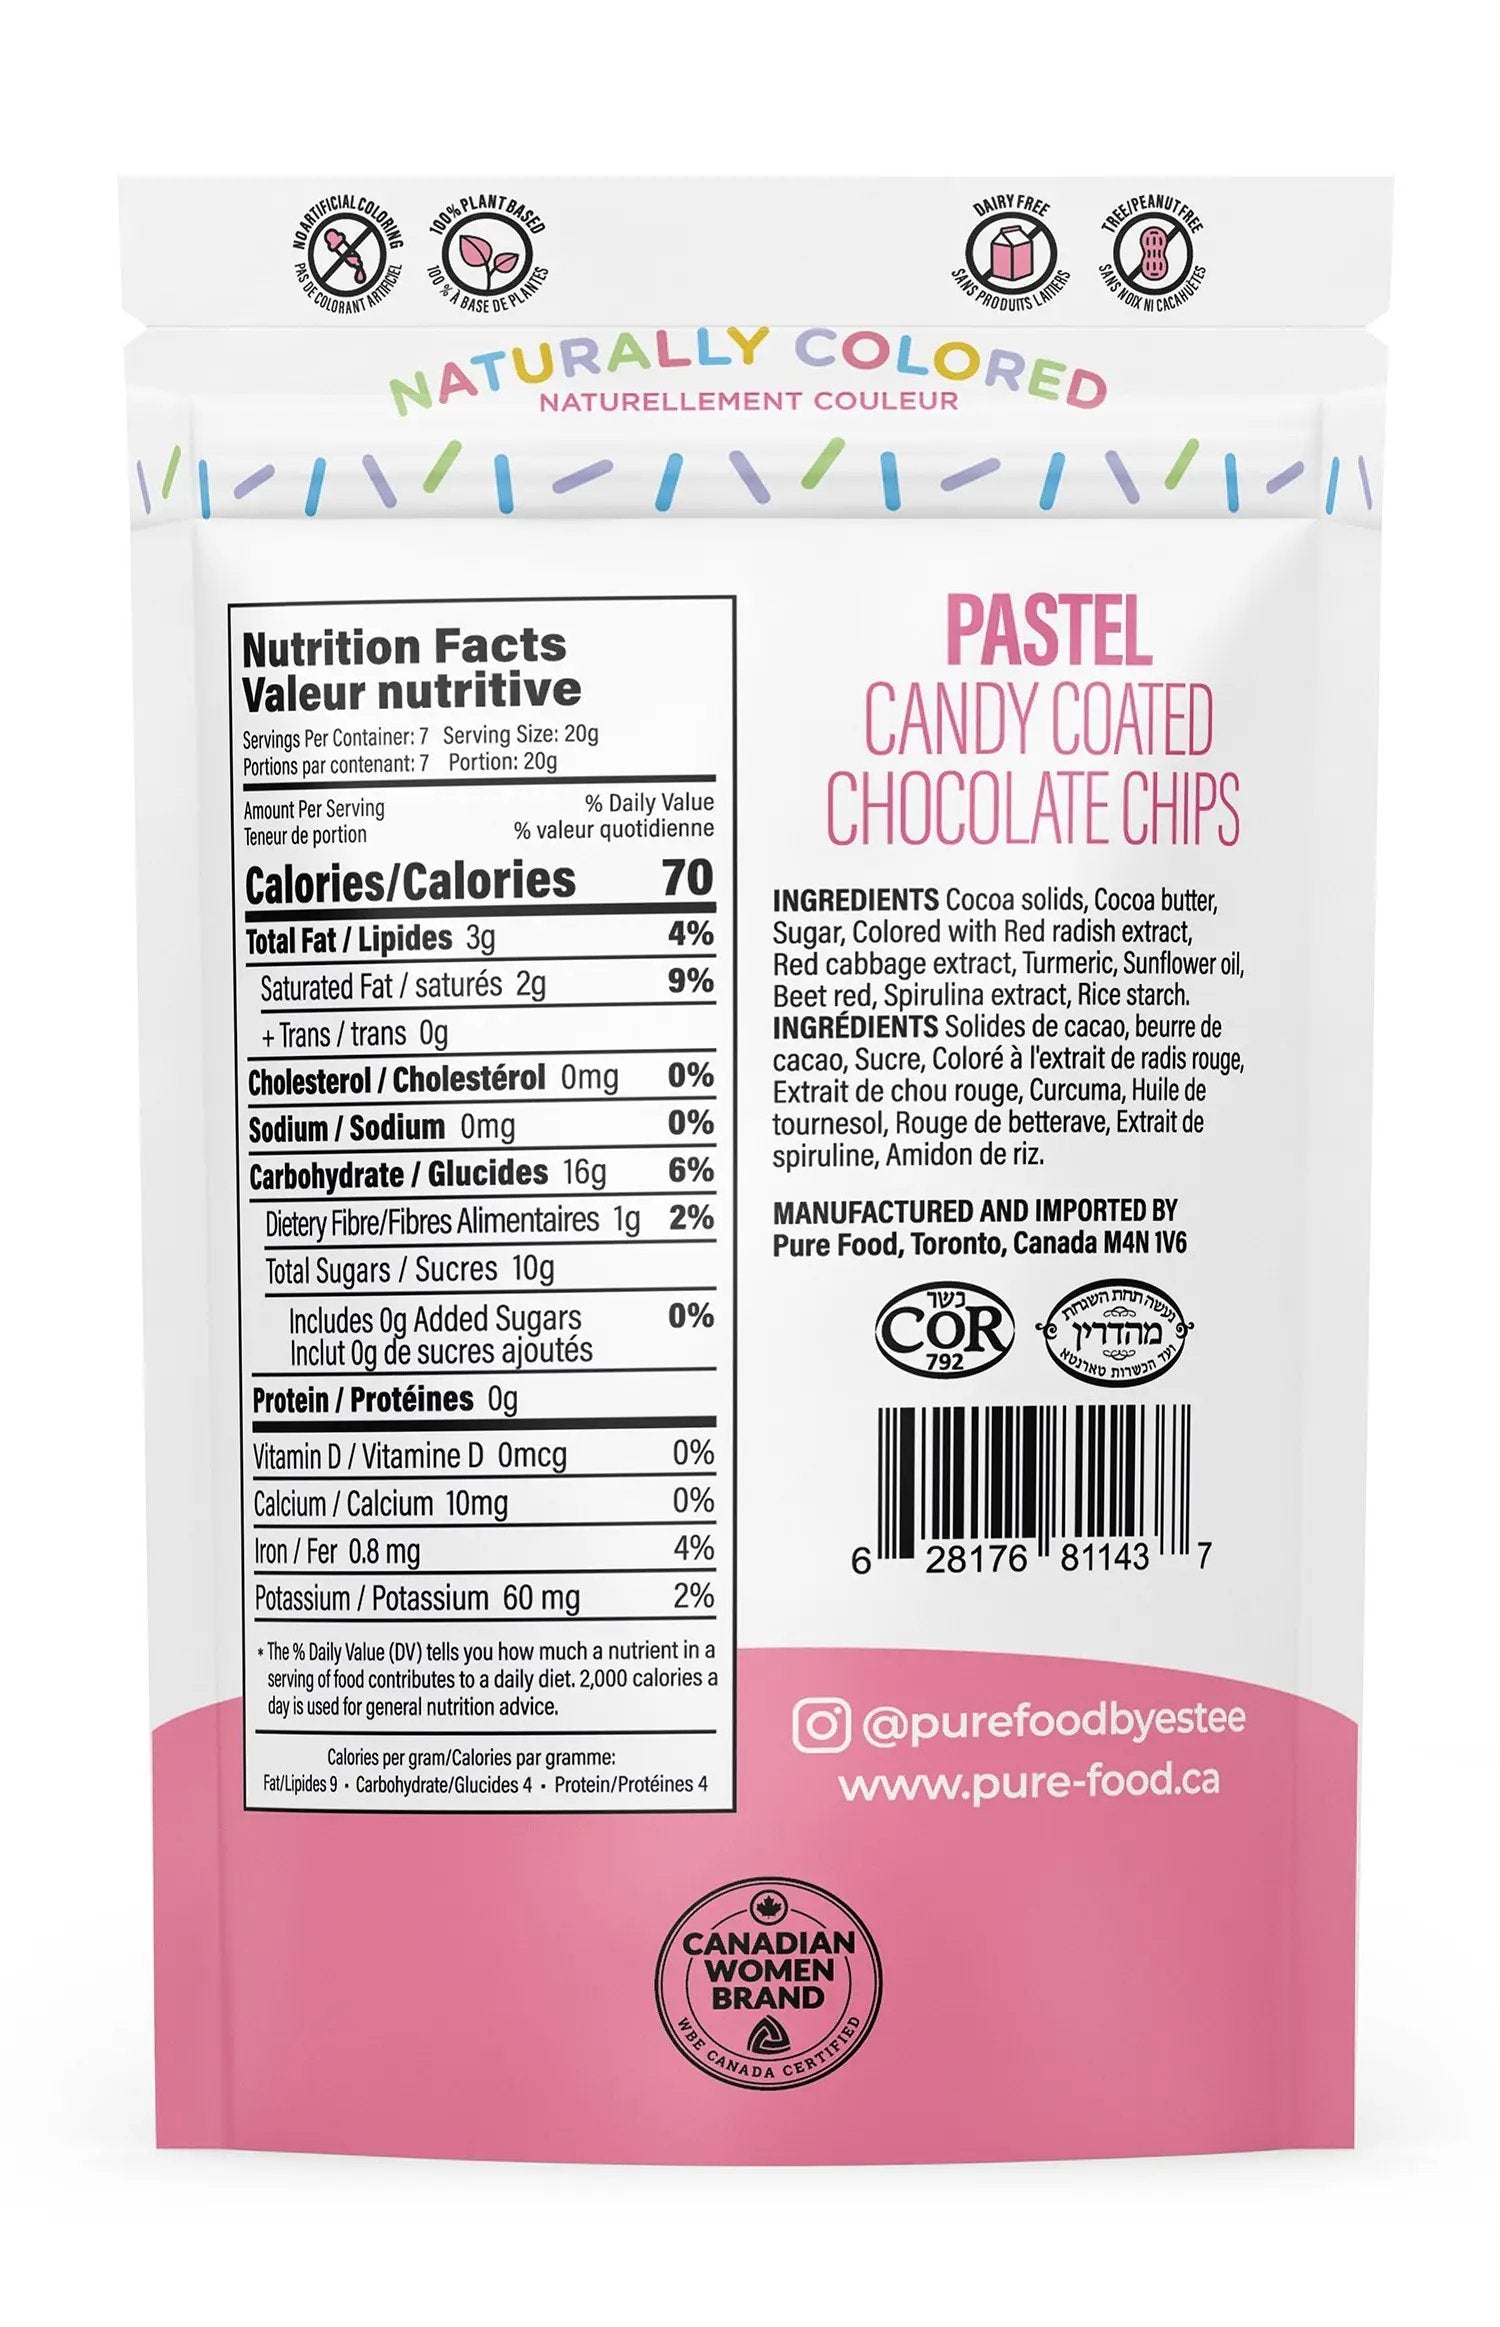 Pastel All Natural Candy Coated Mini Chocolate Chips - 5 OZ -  12 Pack